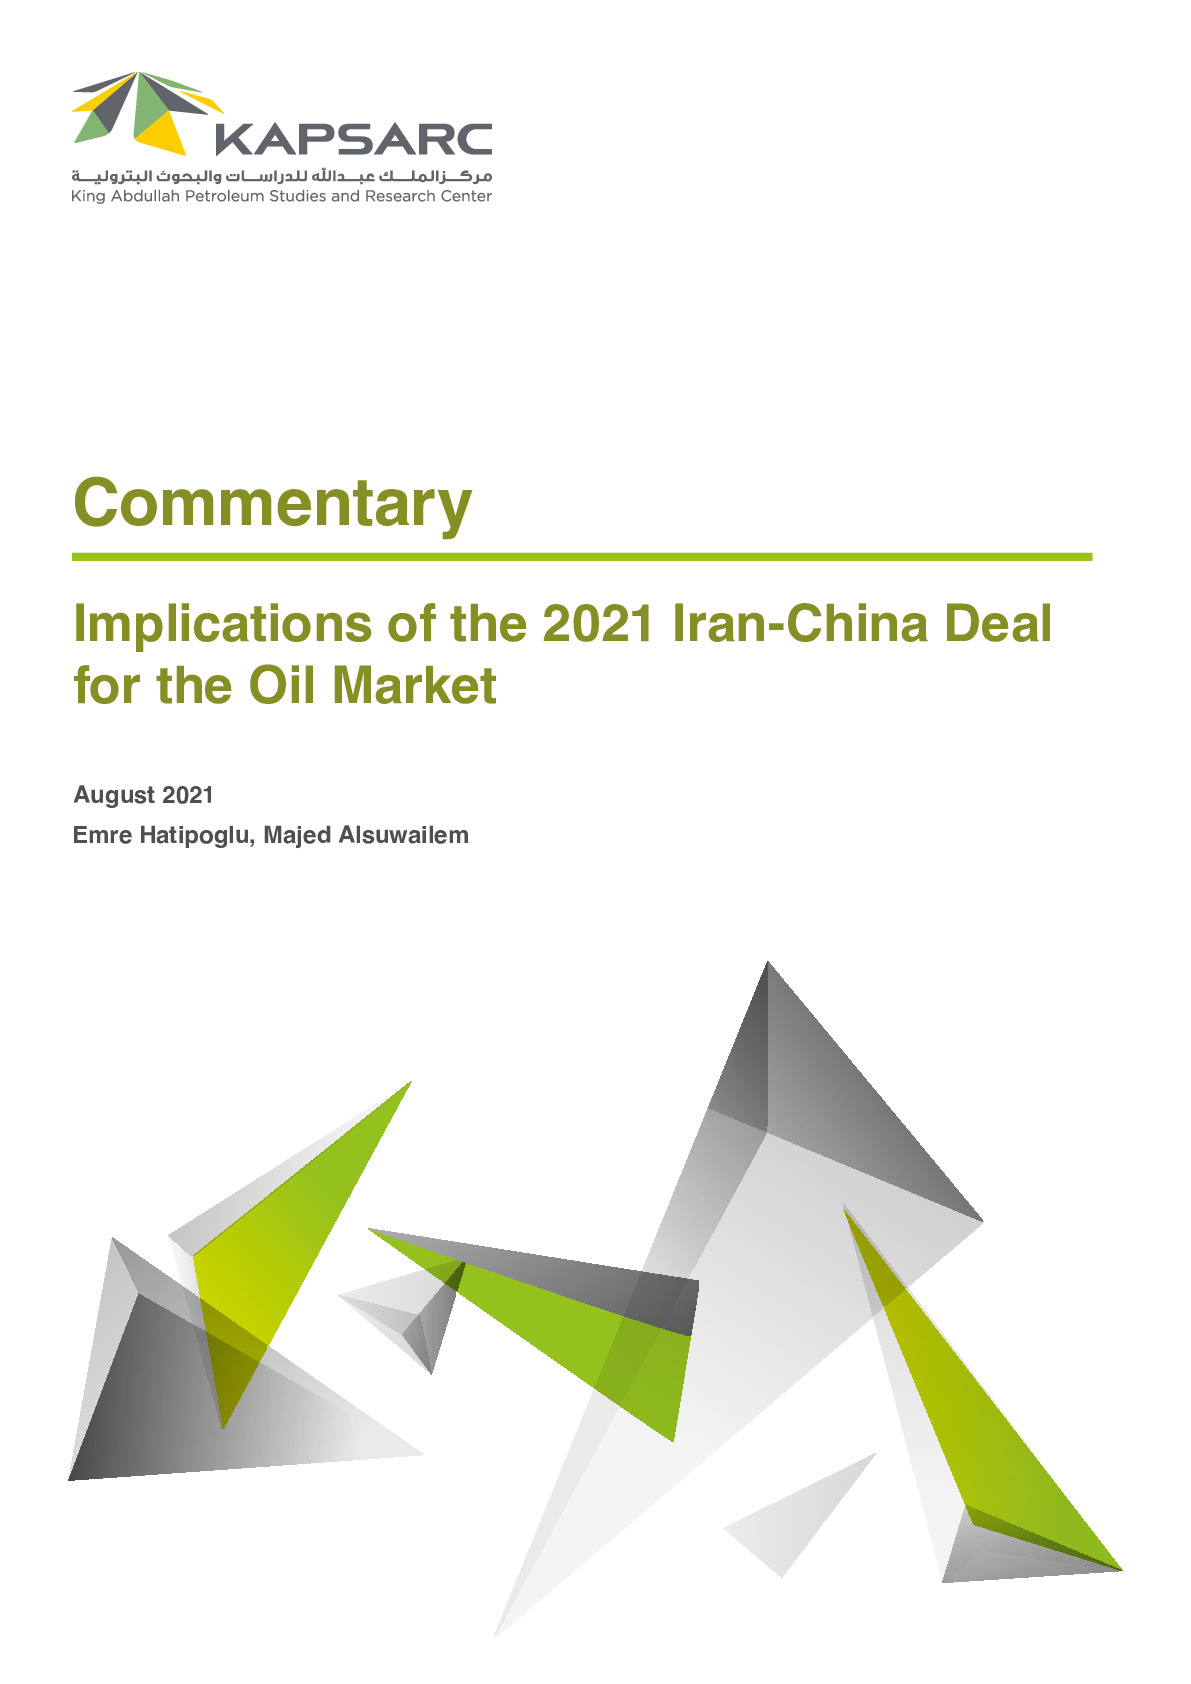 Implications of the 2021 Iran-China Deal for the Oil Market